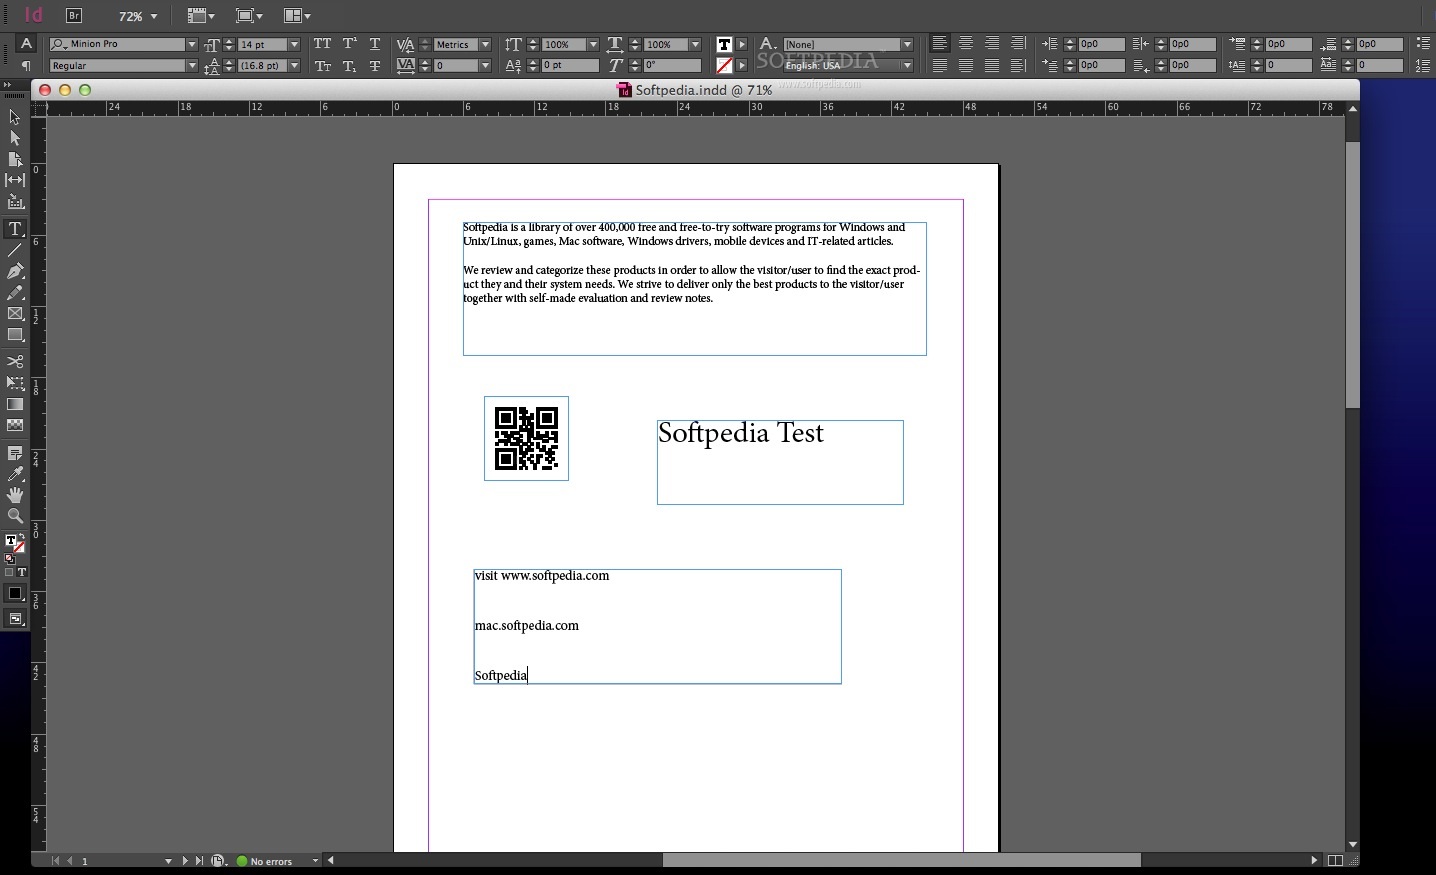 where can i buy adobe indesign